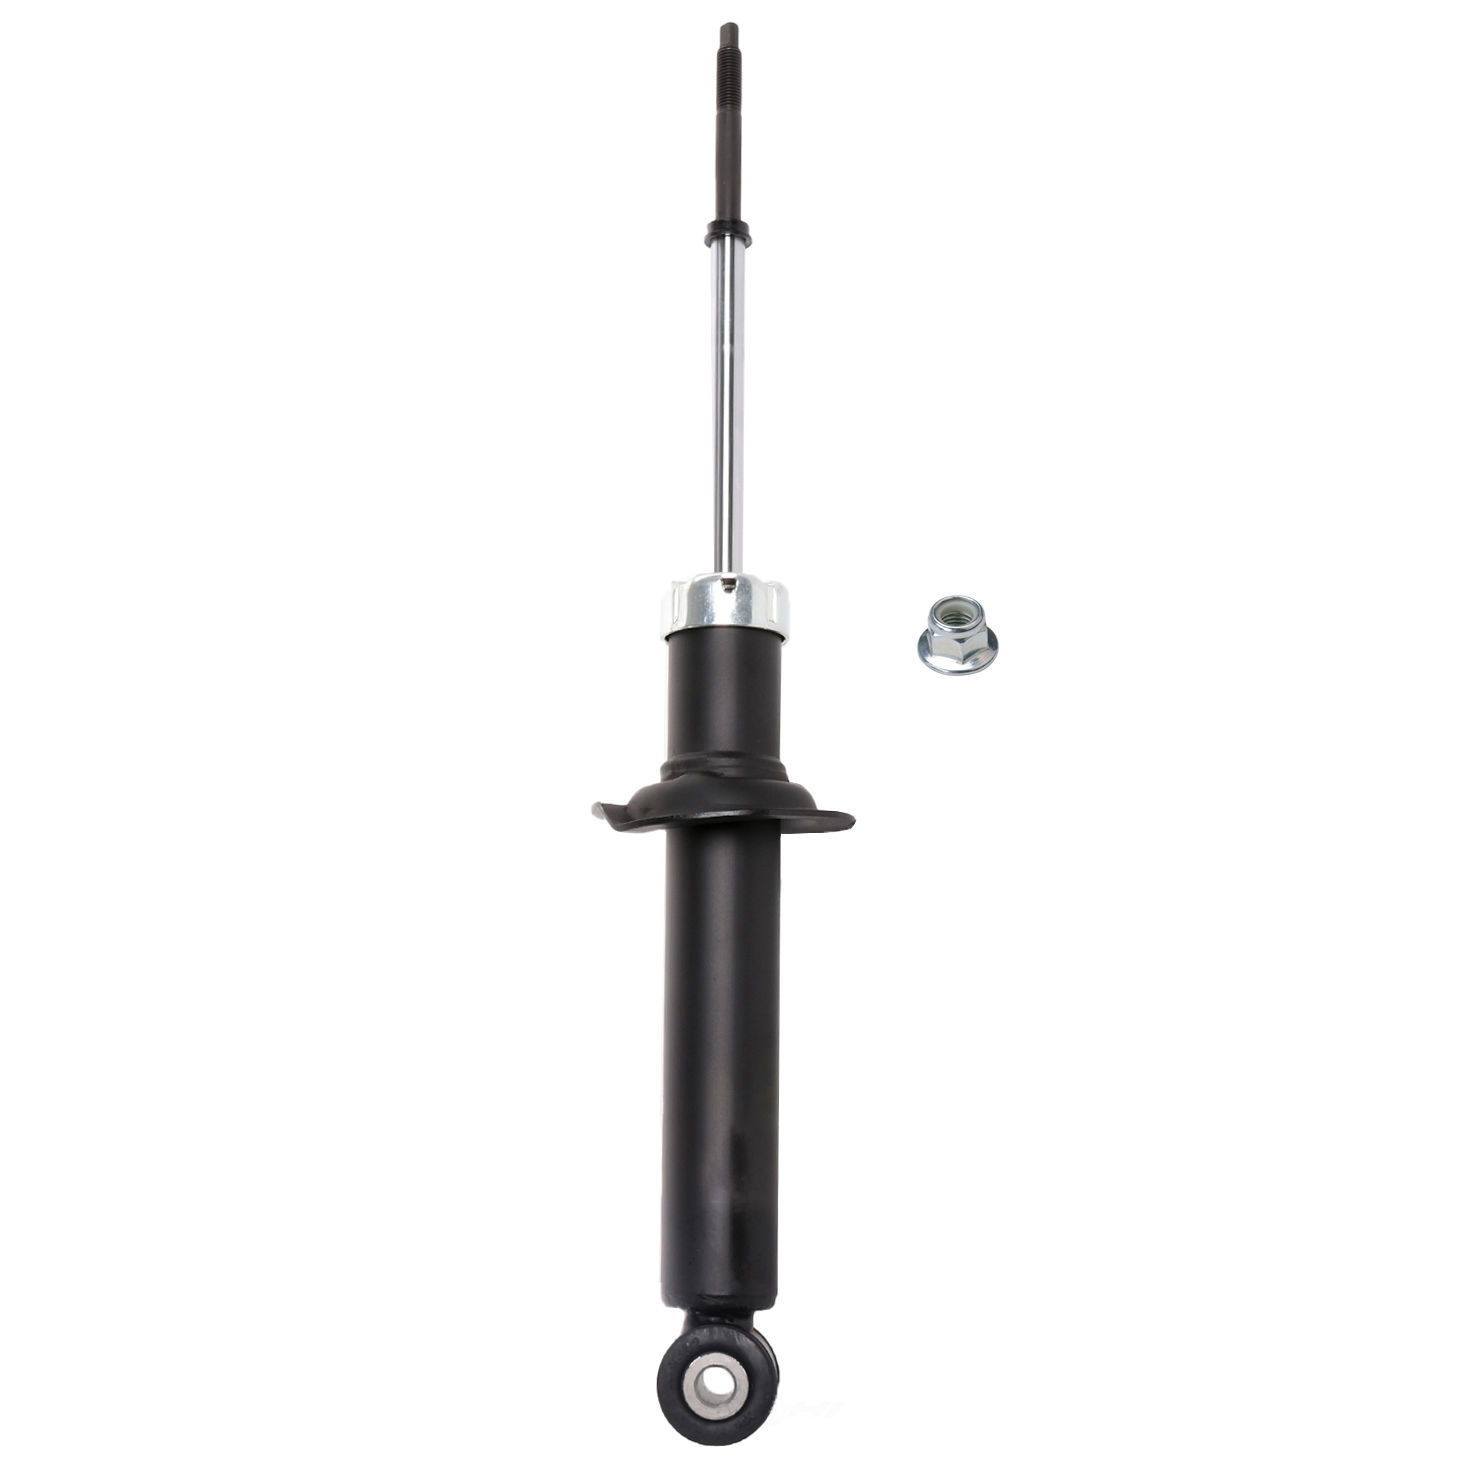 PERFORMANCE RIDE TECHNOLOGY BY ADD - Suspension Strut Assembly - P6T 372148